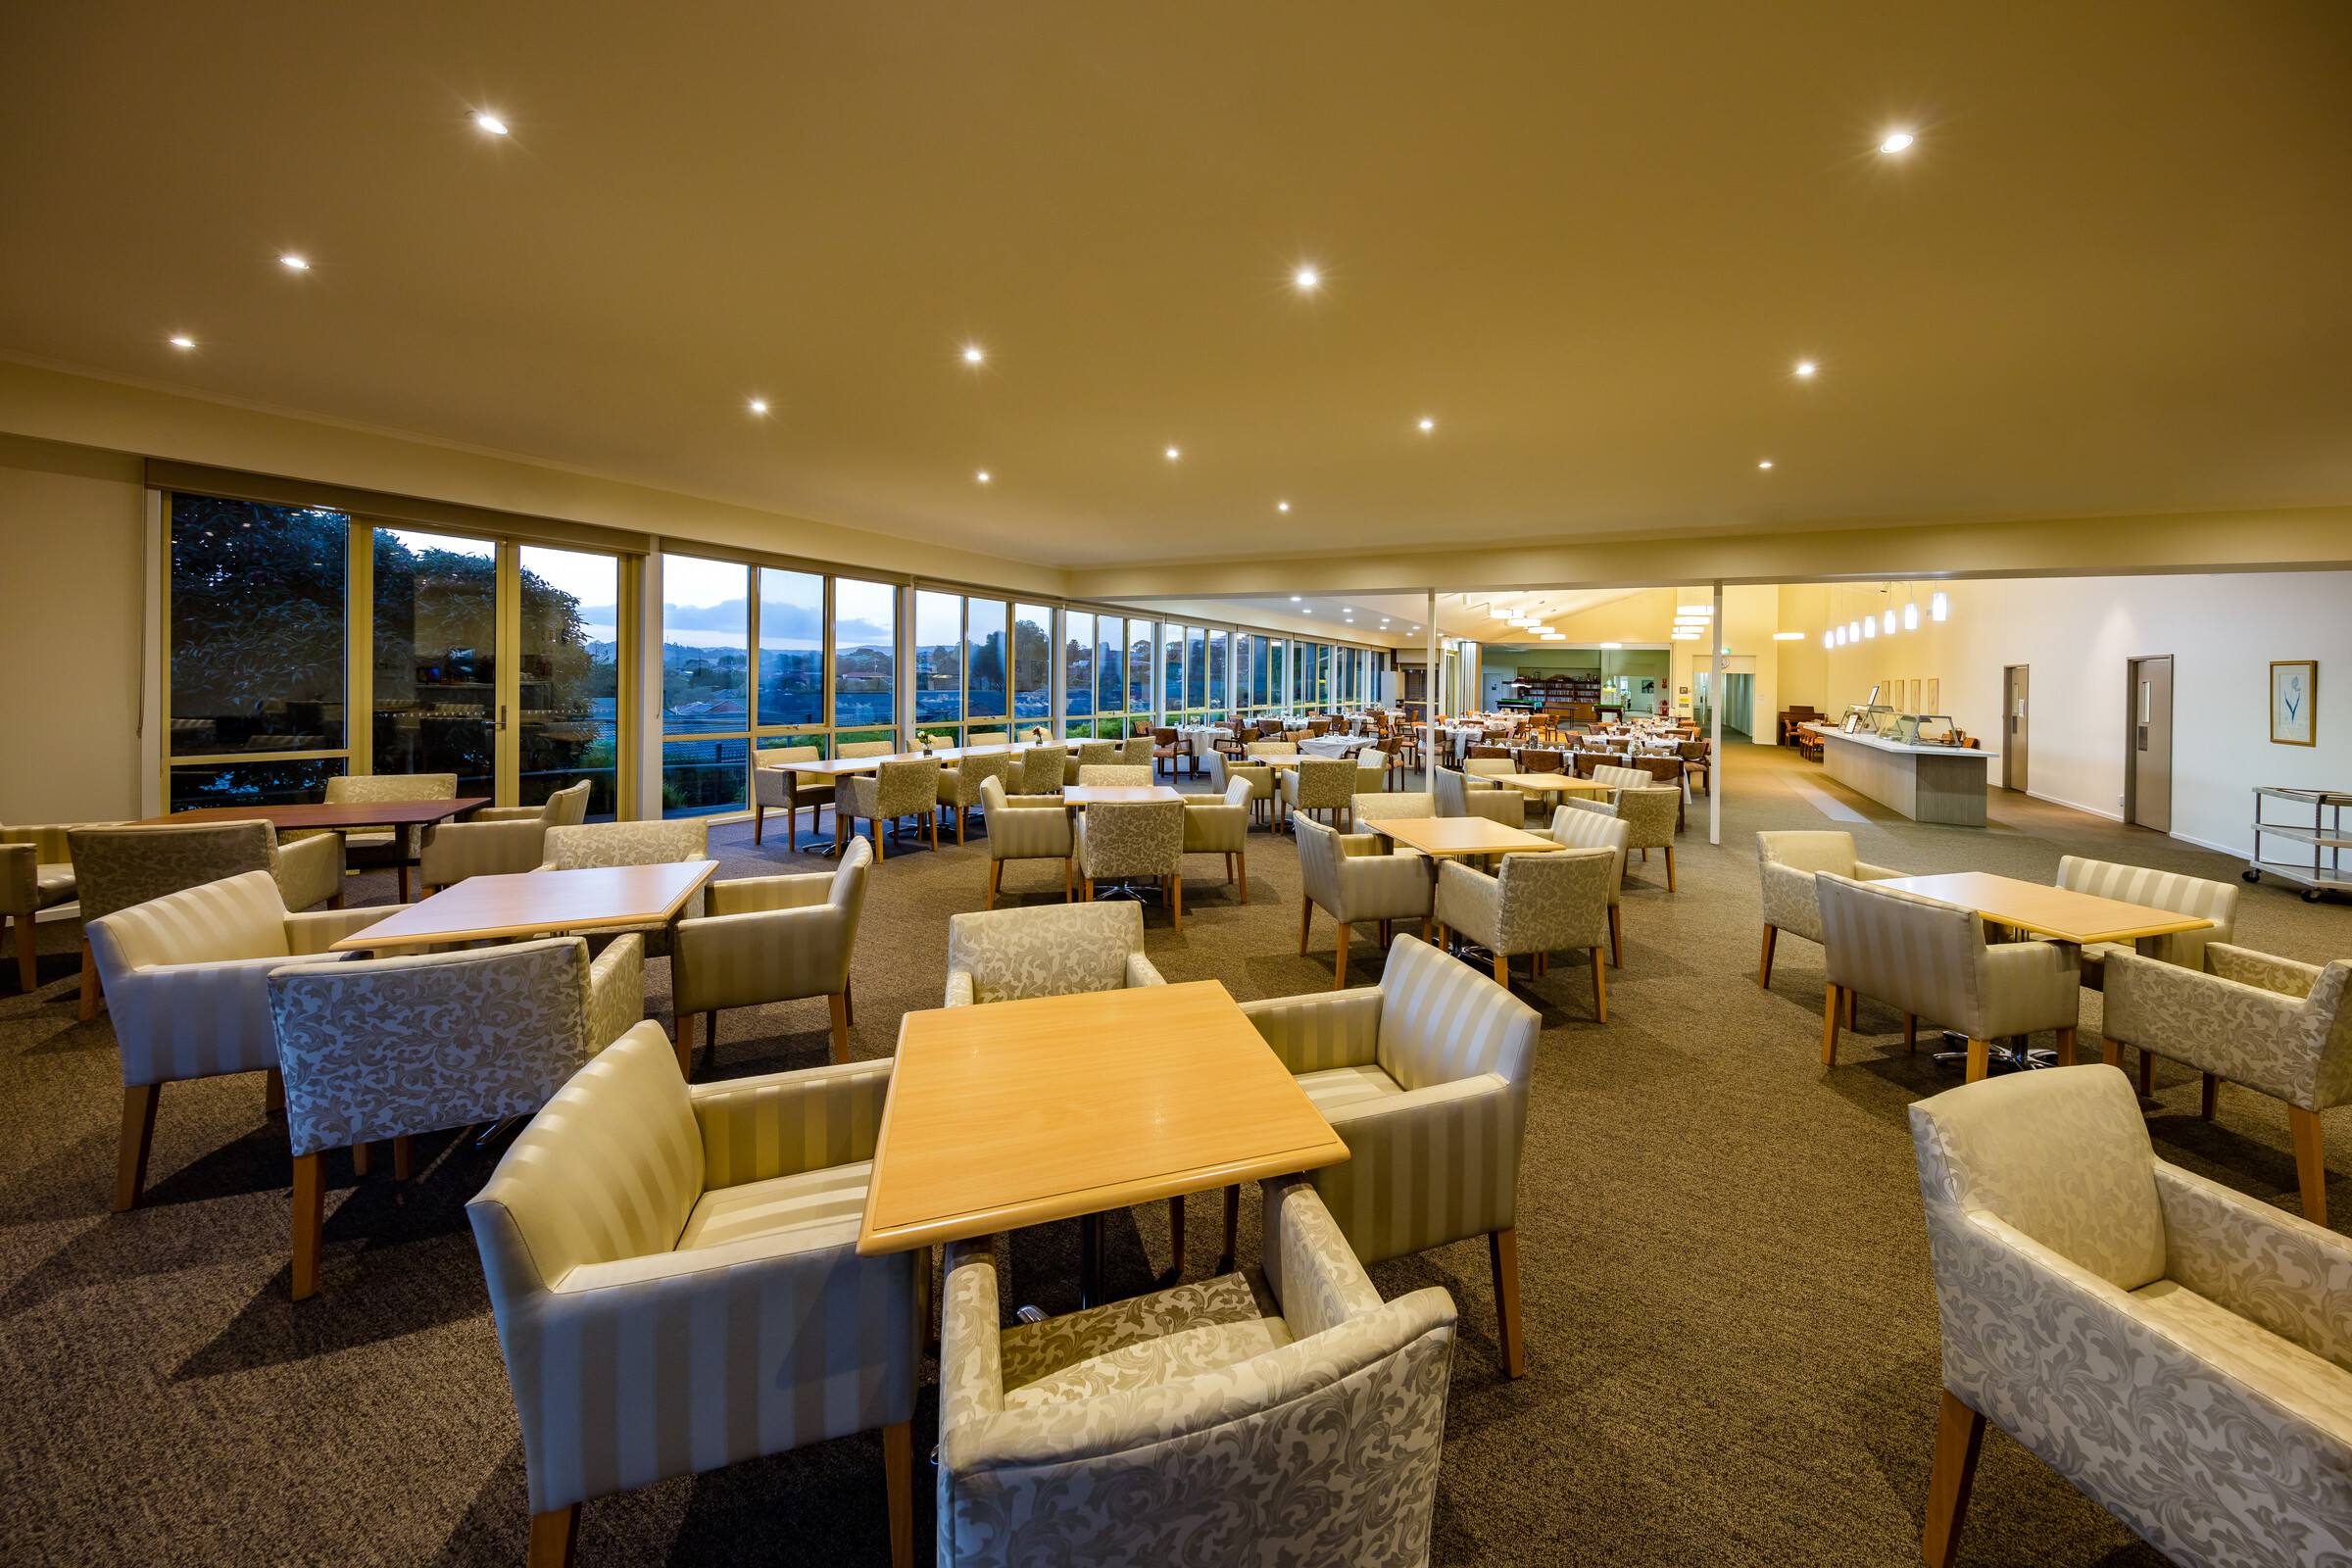 Meadowvale Village lounge area with seating looking towards dining area